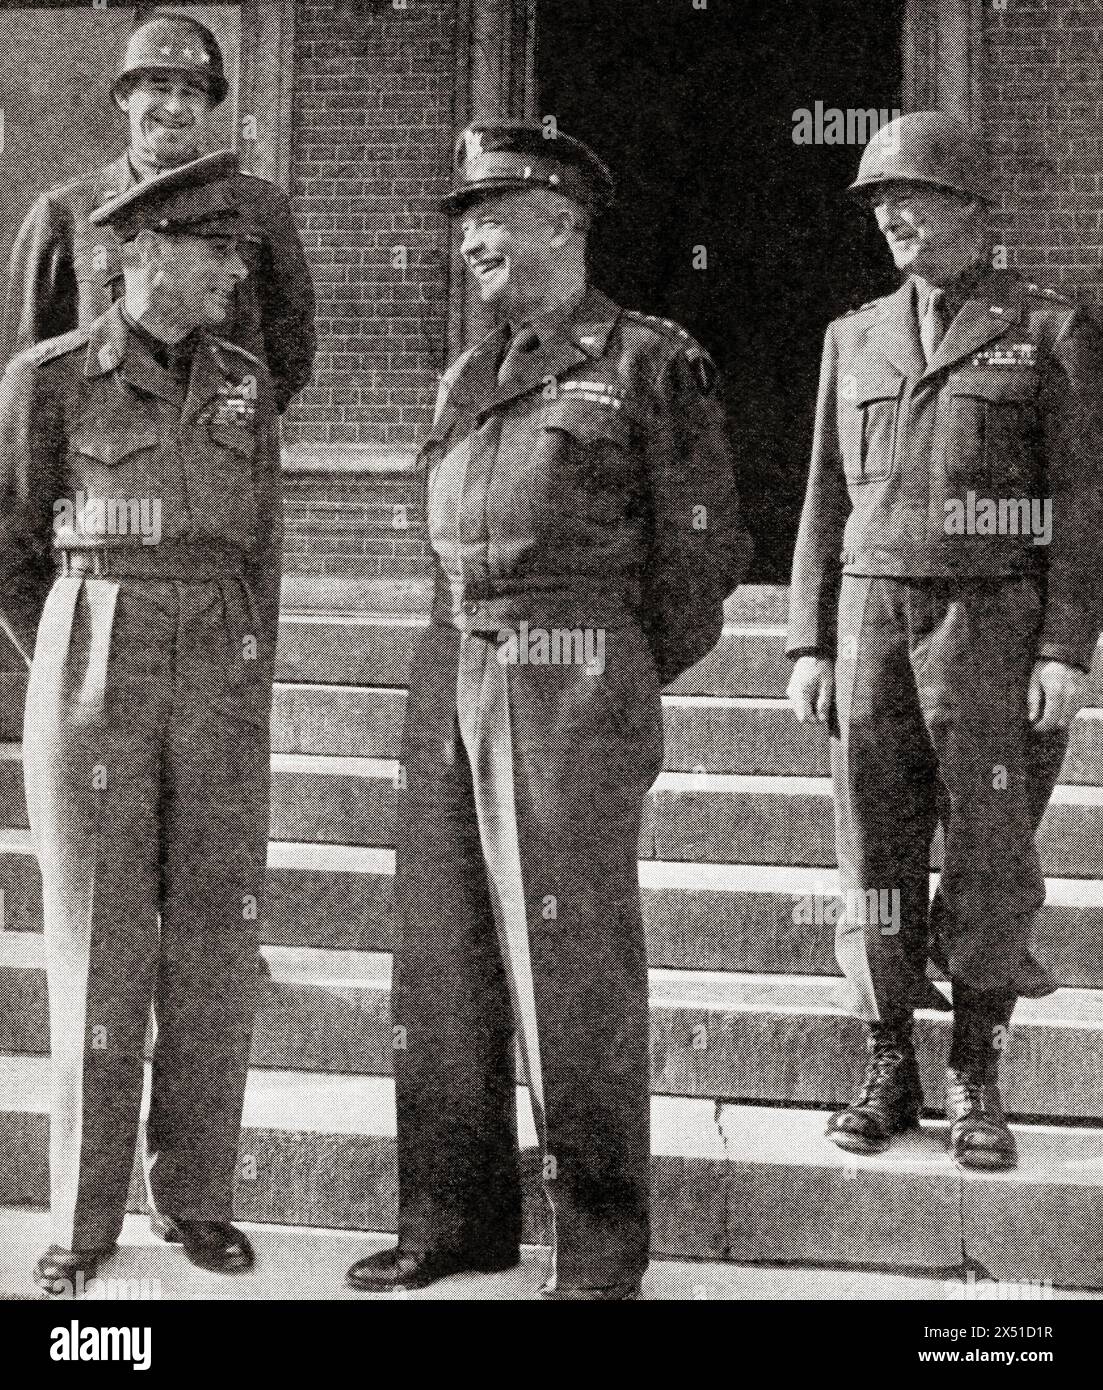 King George VI on his royal tour of the battle areas in Western Europe during WWII, seen here with General Eisenhower, 1944.  George VI, 1895 – 1952. King of the United Kingdom.  Dwight David Eisenhower, 1890 –1969, nicknamed Ike. American military officer, statesman and 34th president of the United States. From The War in Pictures, Sixth Year. Stock Photo